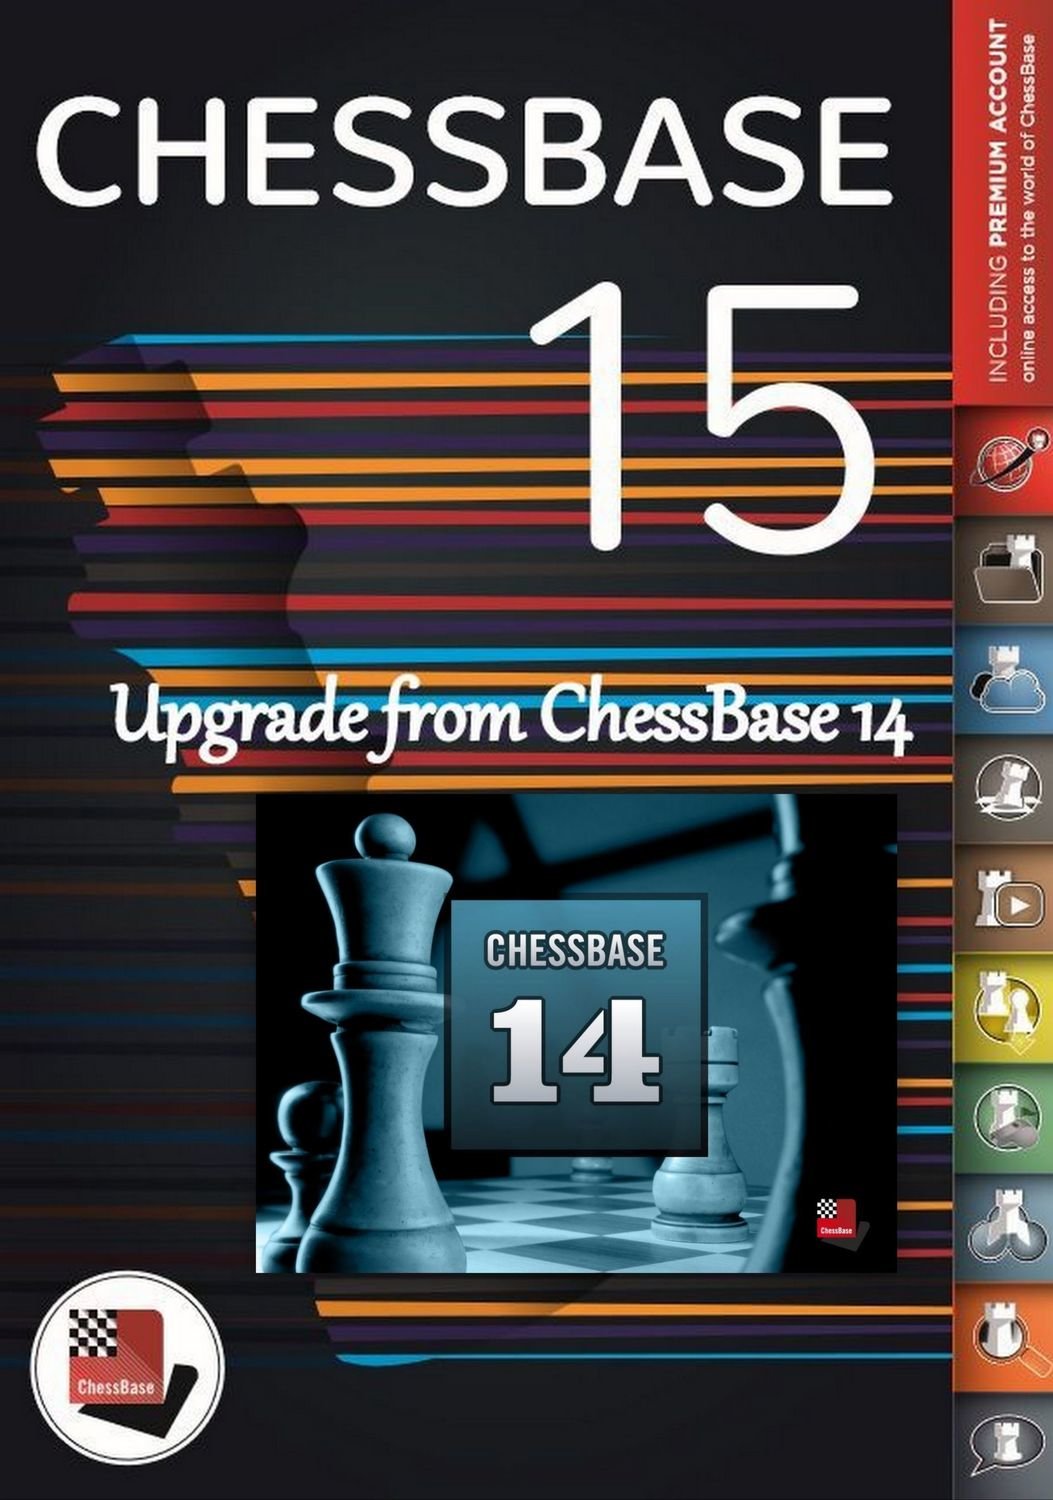 Chessbase compatible engines